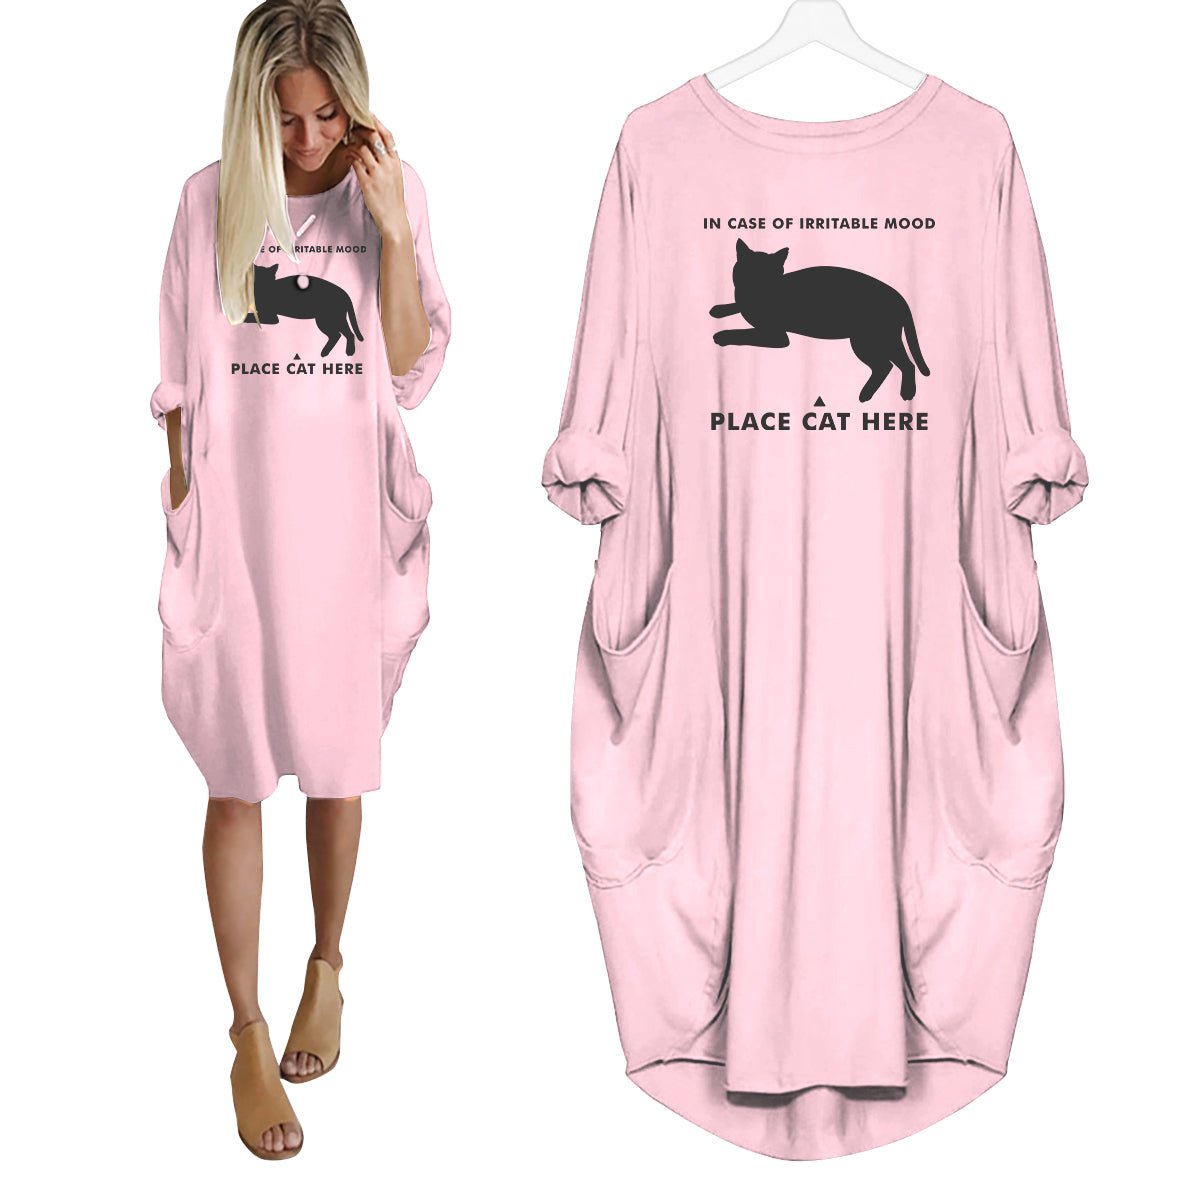 Place Cat Here Dress